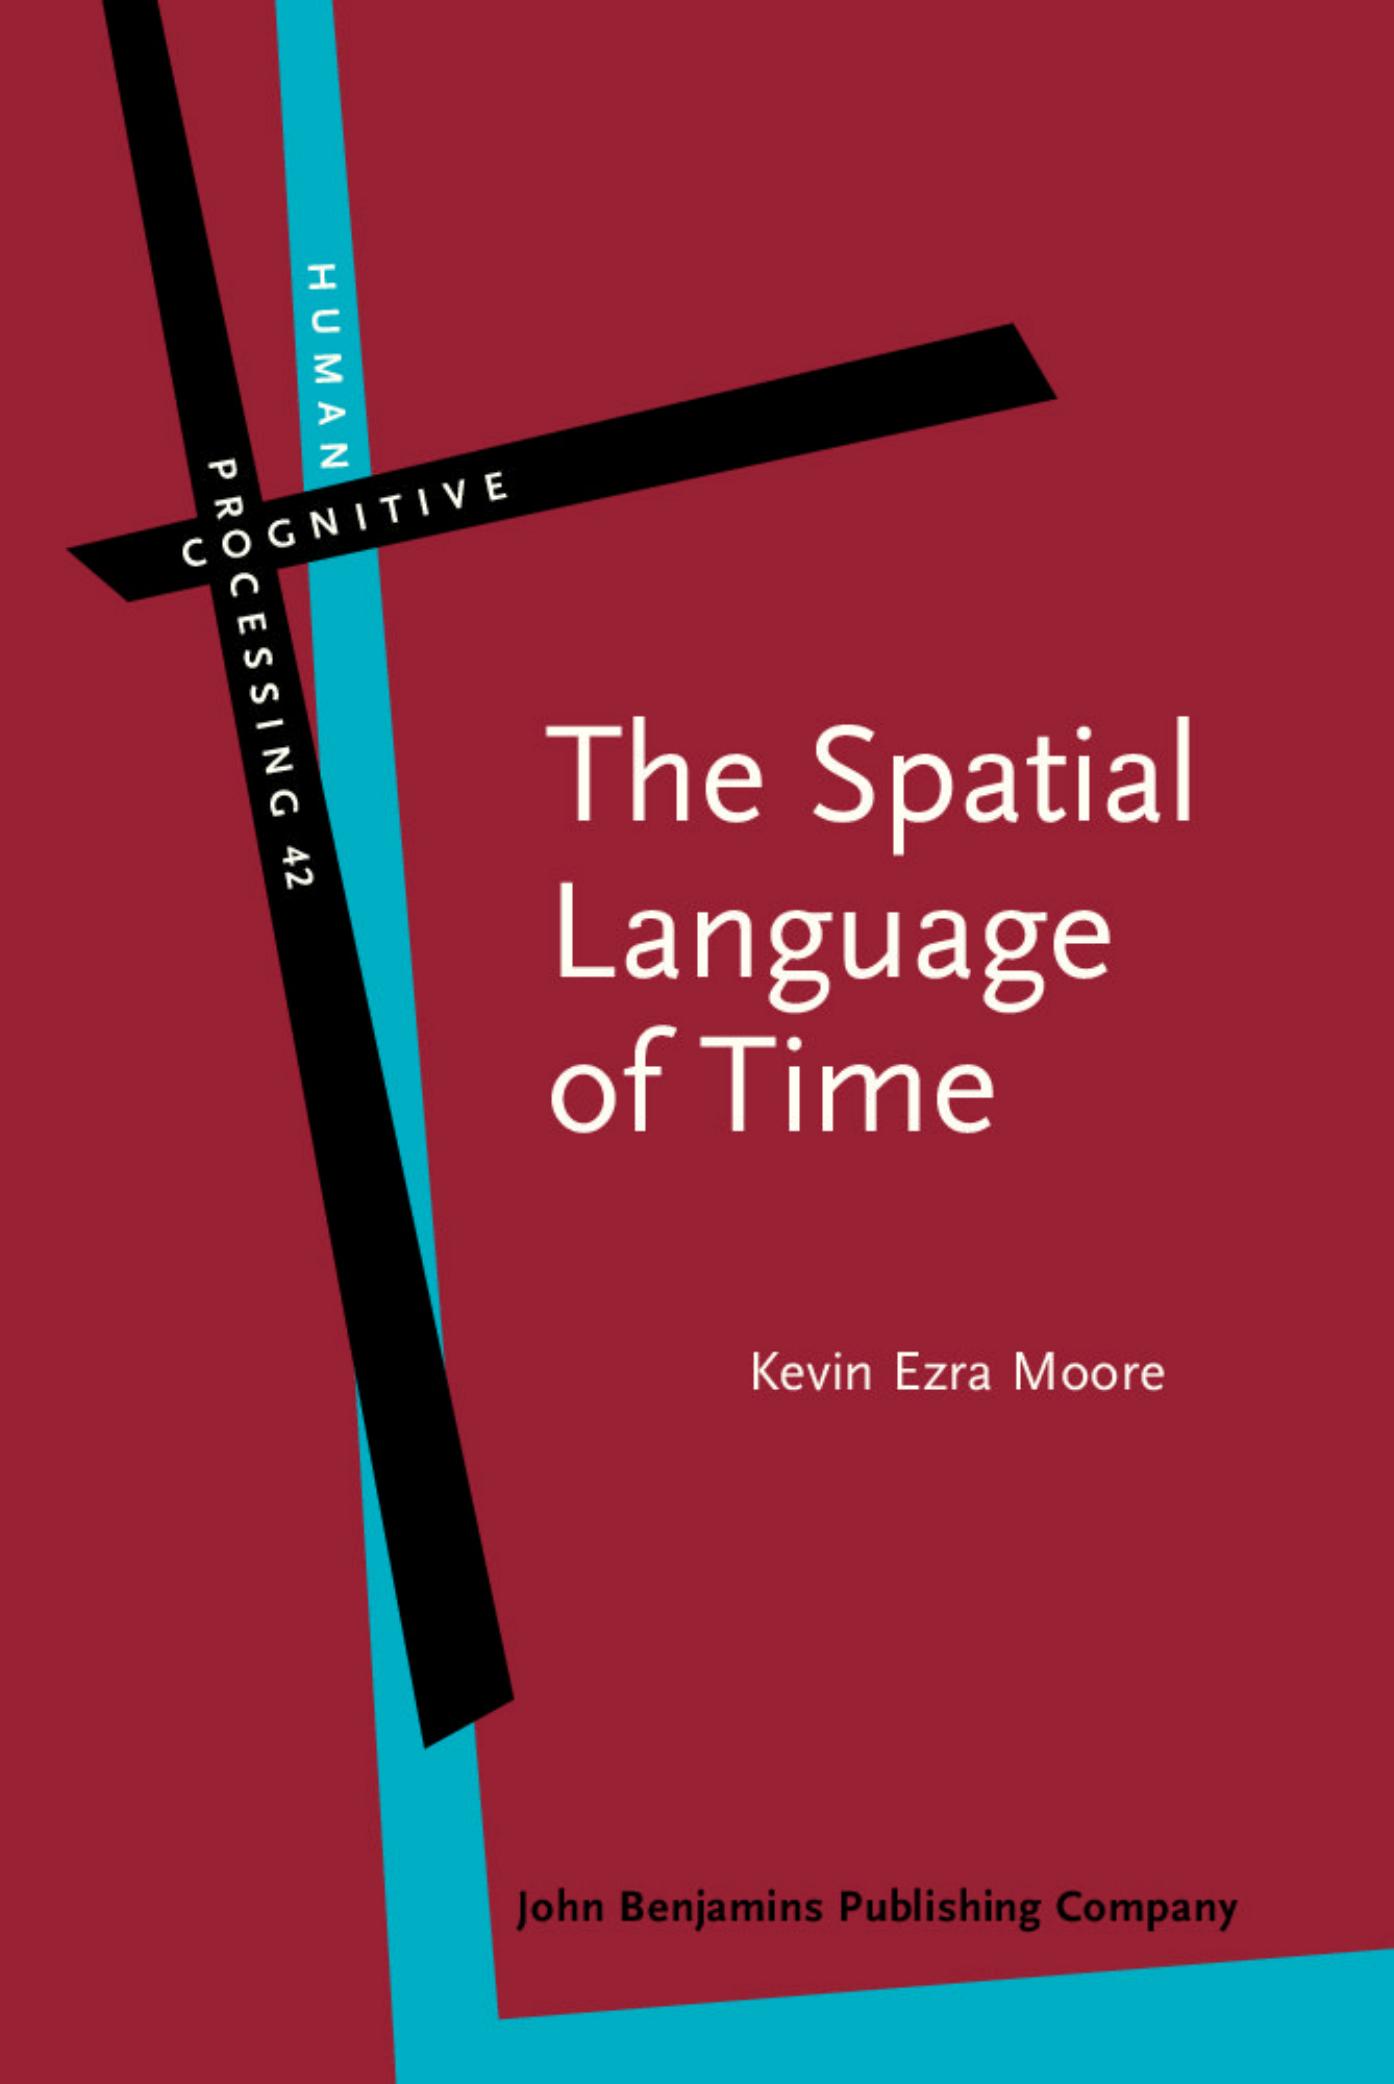 The Spatial Language of Time: Metaphor, Metonymy, and Frames of Reference